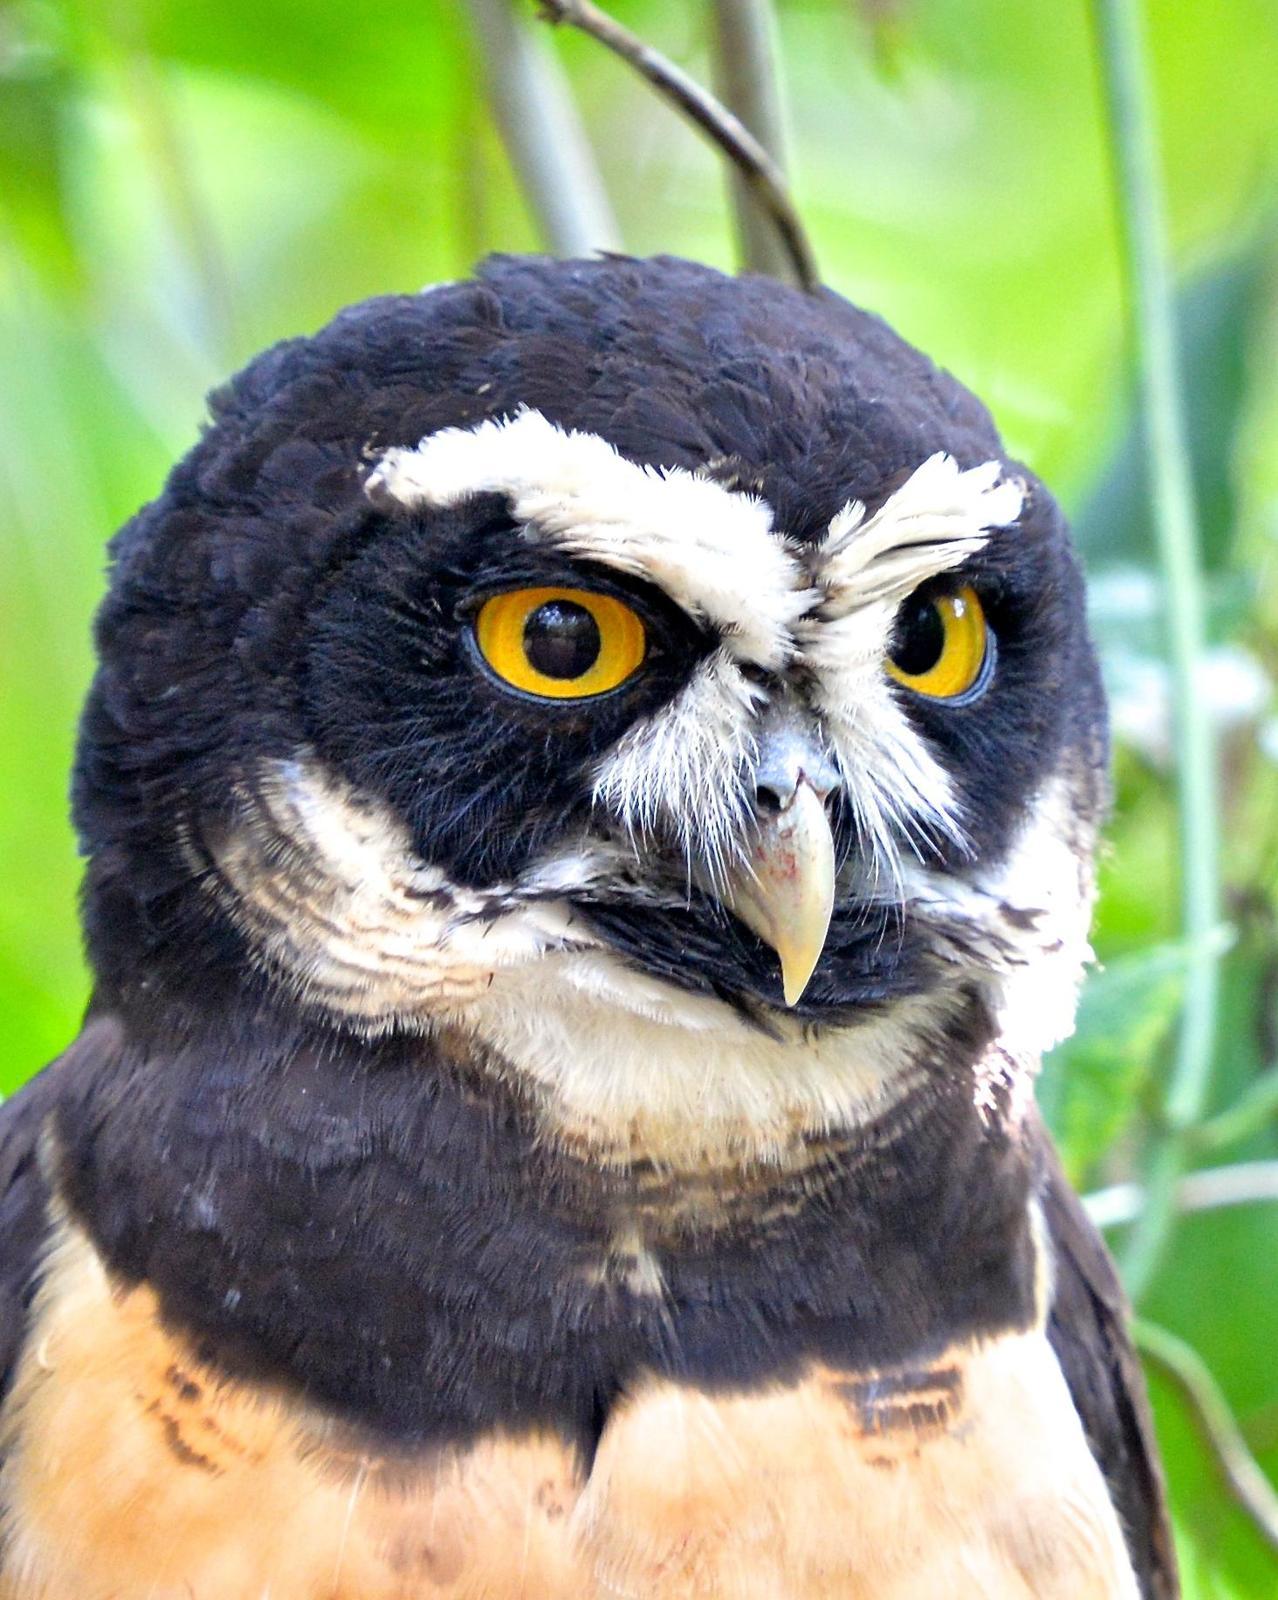 Spectacled Owl Photo by Gerald Friesen